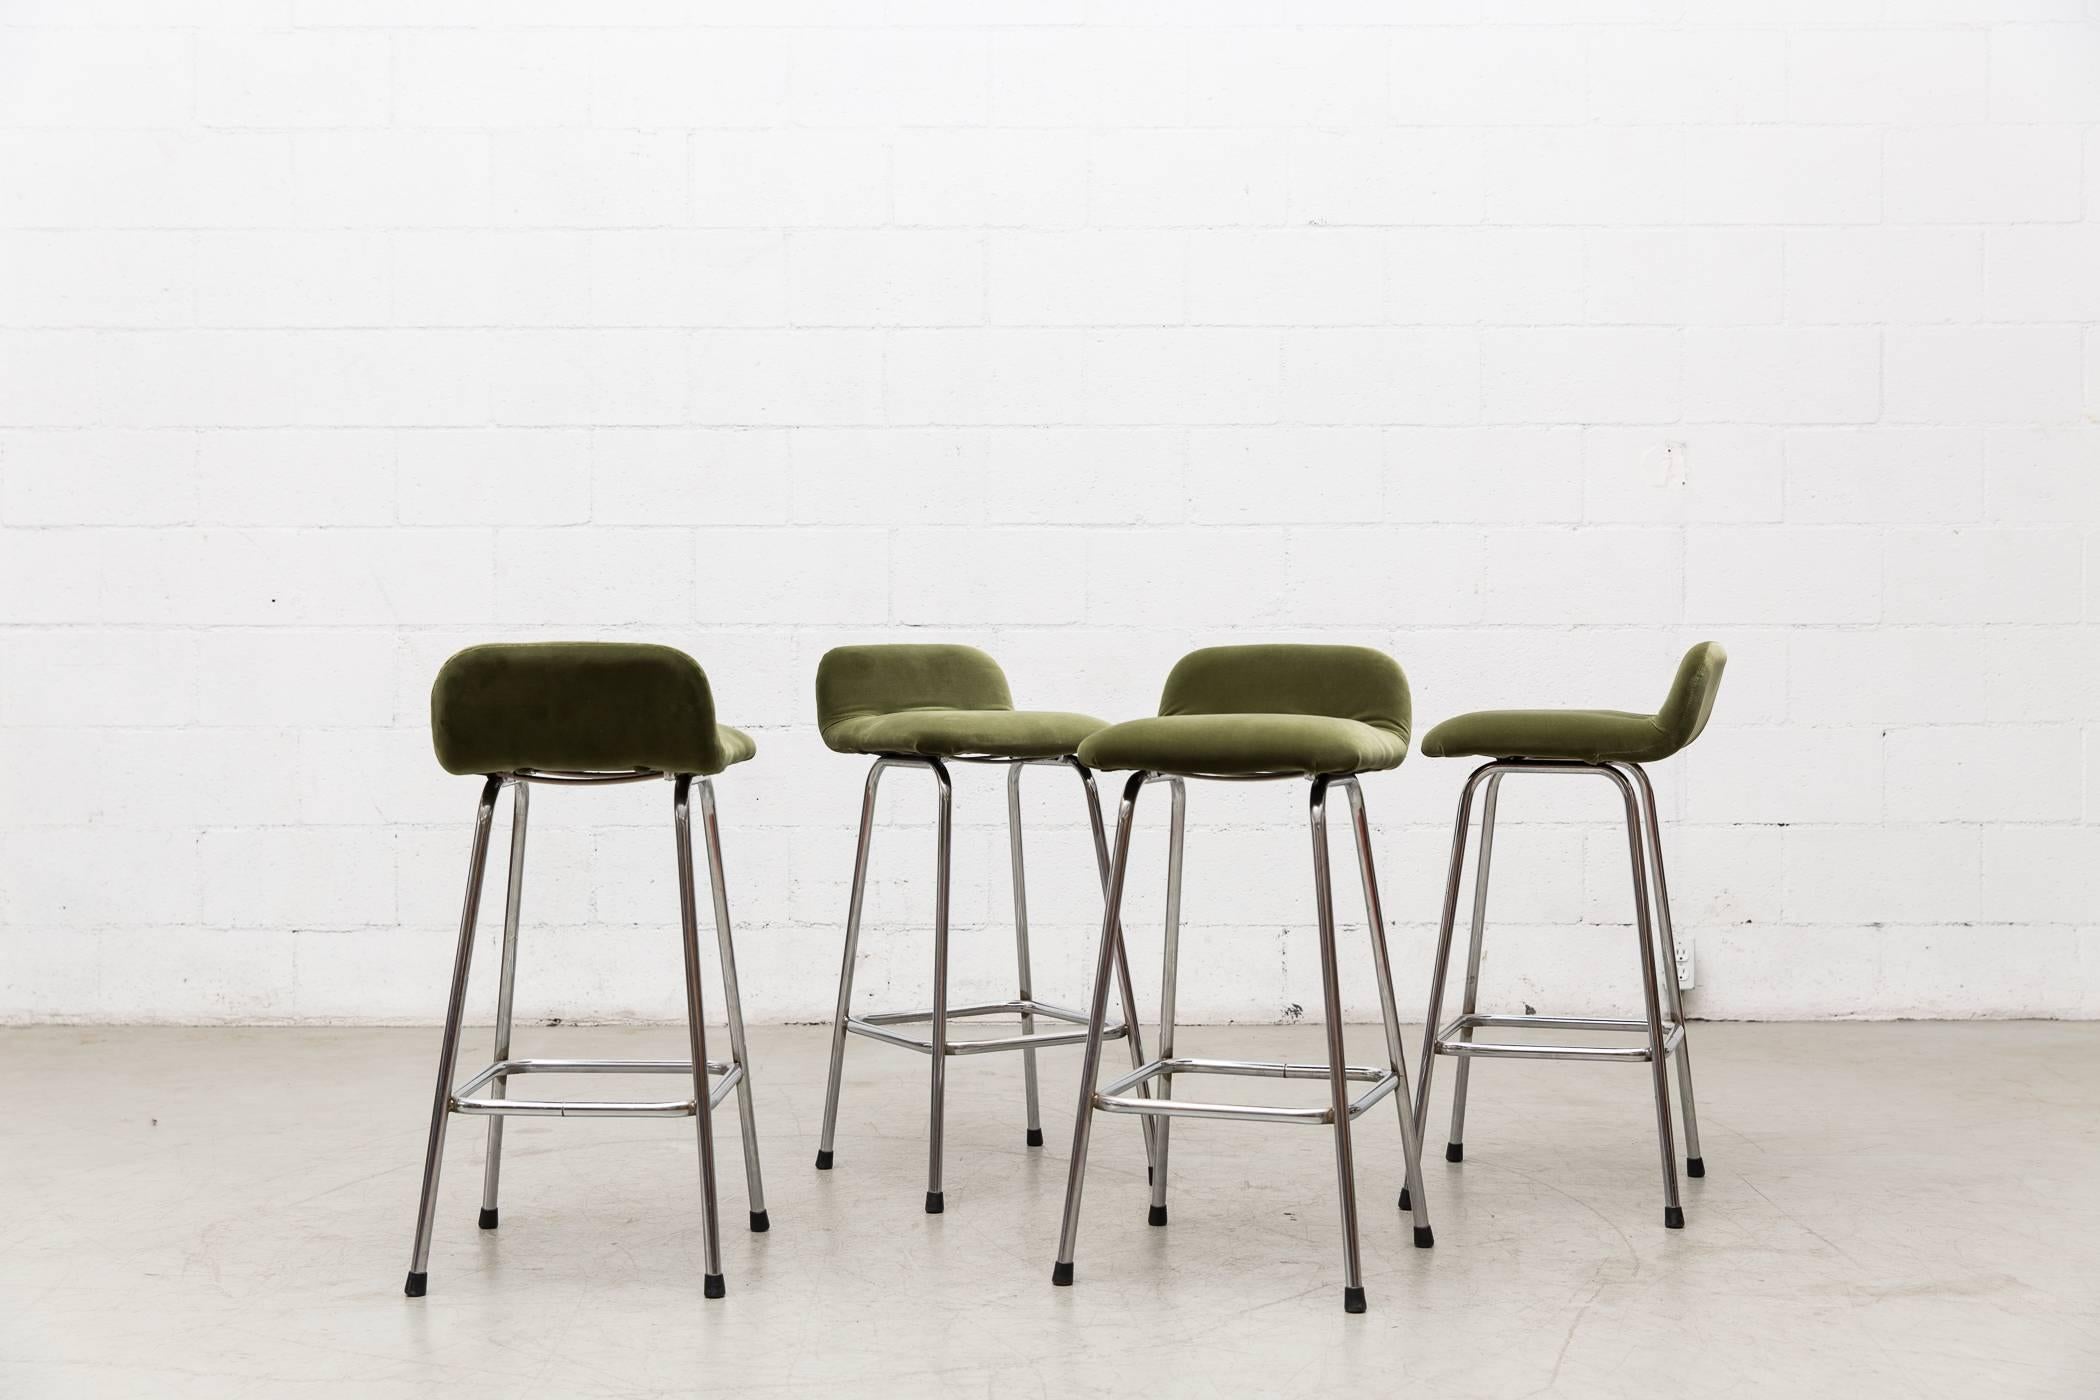 Set of four chrome bar stools with seats newly upholstered in olive green velvet. Frames are in original condition with visible signs of wear. Set price.